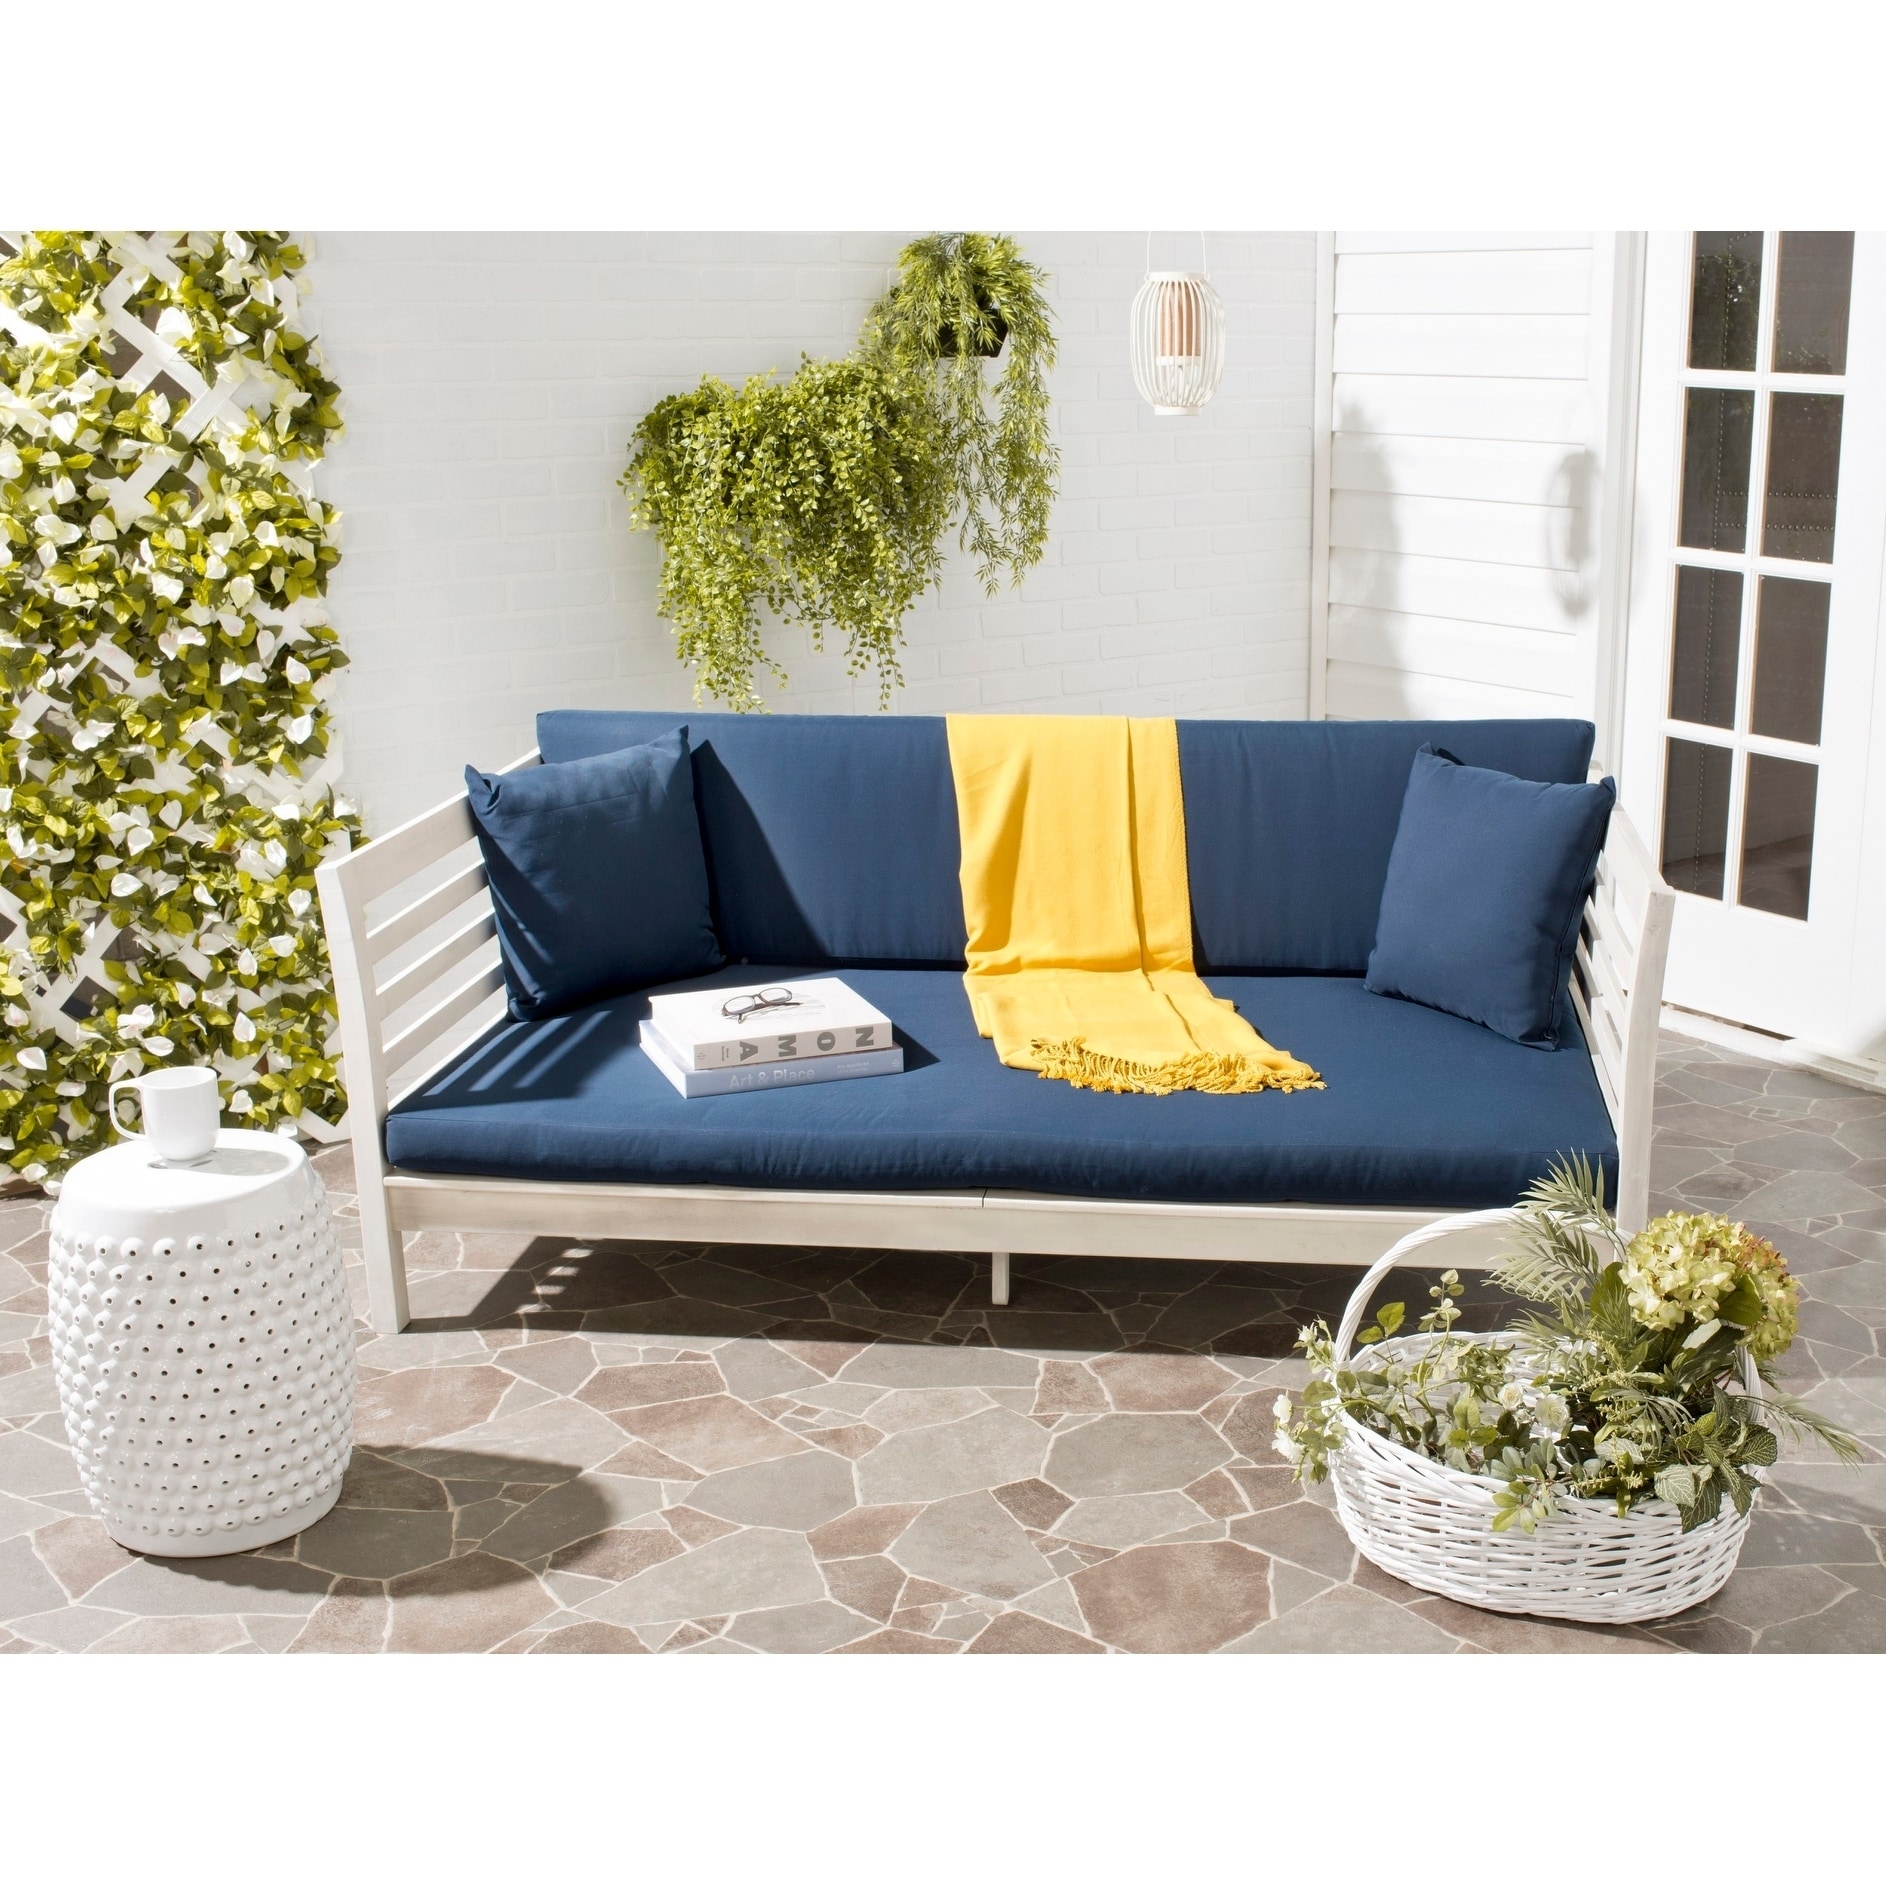 Safavieh Outdoor Living Malibu Antiqued White Acacia Wood Navy Cushion Daybed